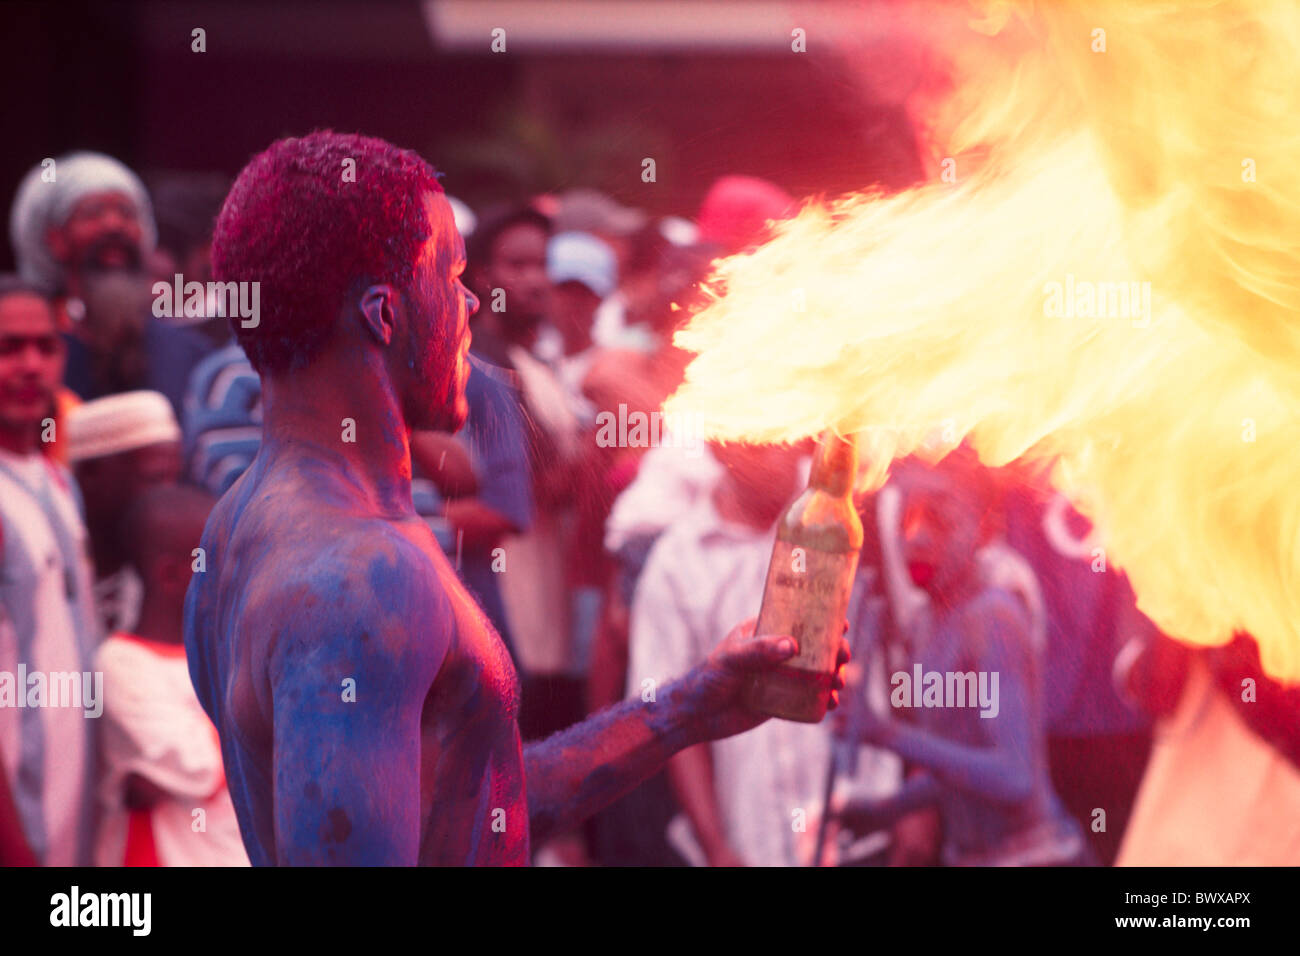 Carnival, Blue Devil, Woodford Square,Trinidad,Traditional mas, blowing fire. Stock Photo